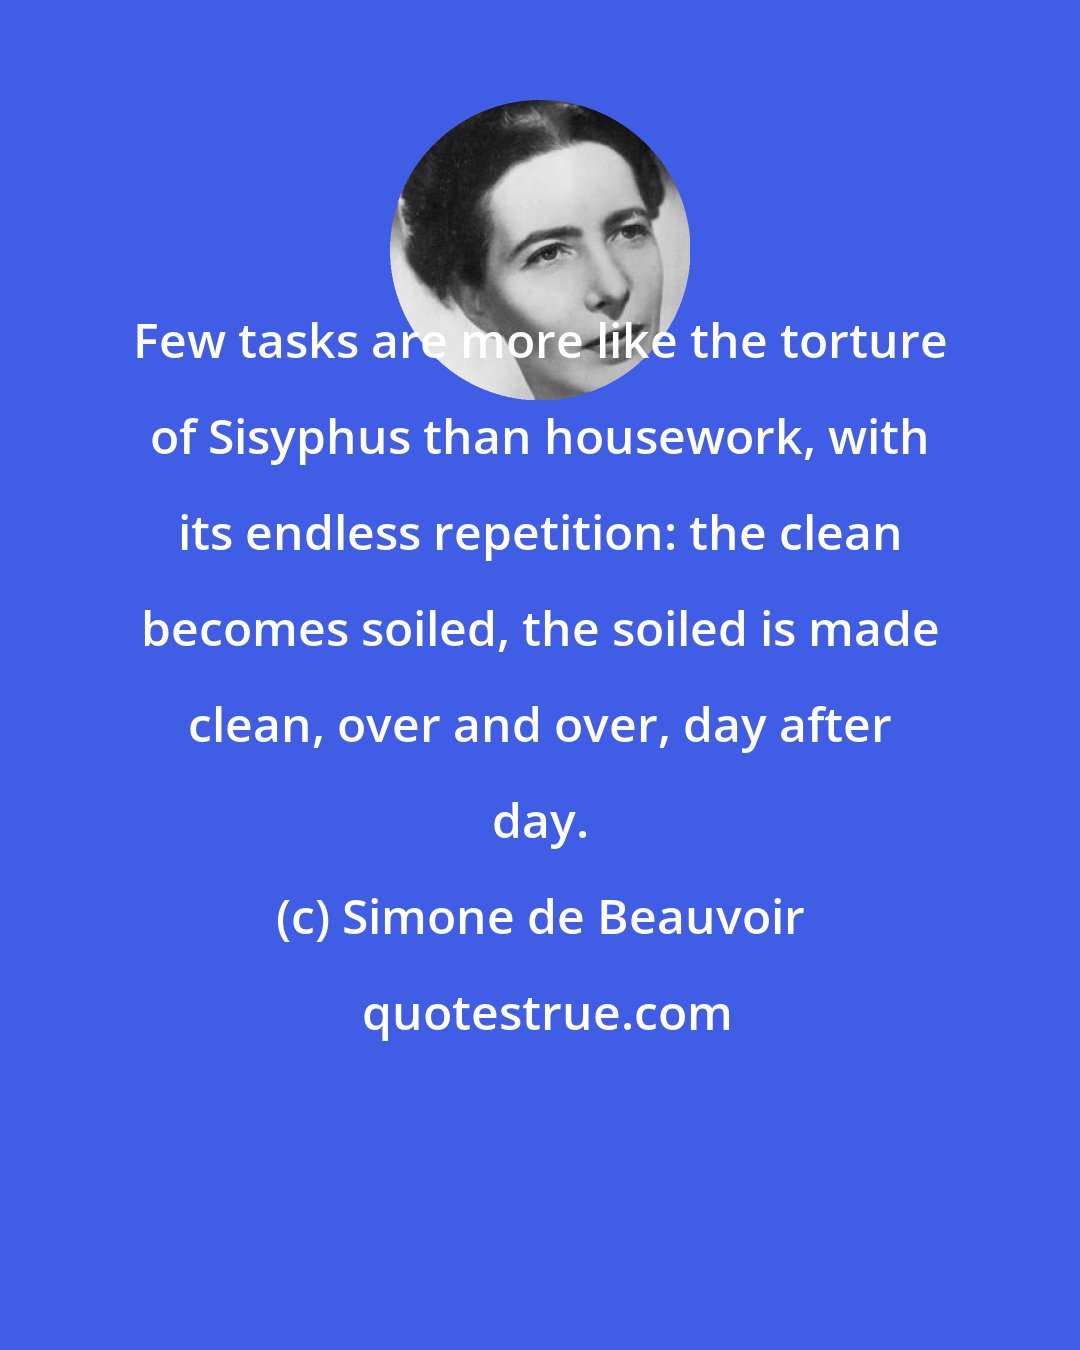 Simone de Beauvoir: Few tasks are more like the torture of Sisyphus than housework, with its endless repetition: the clean becomes soiled, the soiled is made clean, over and over, day after day.